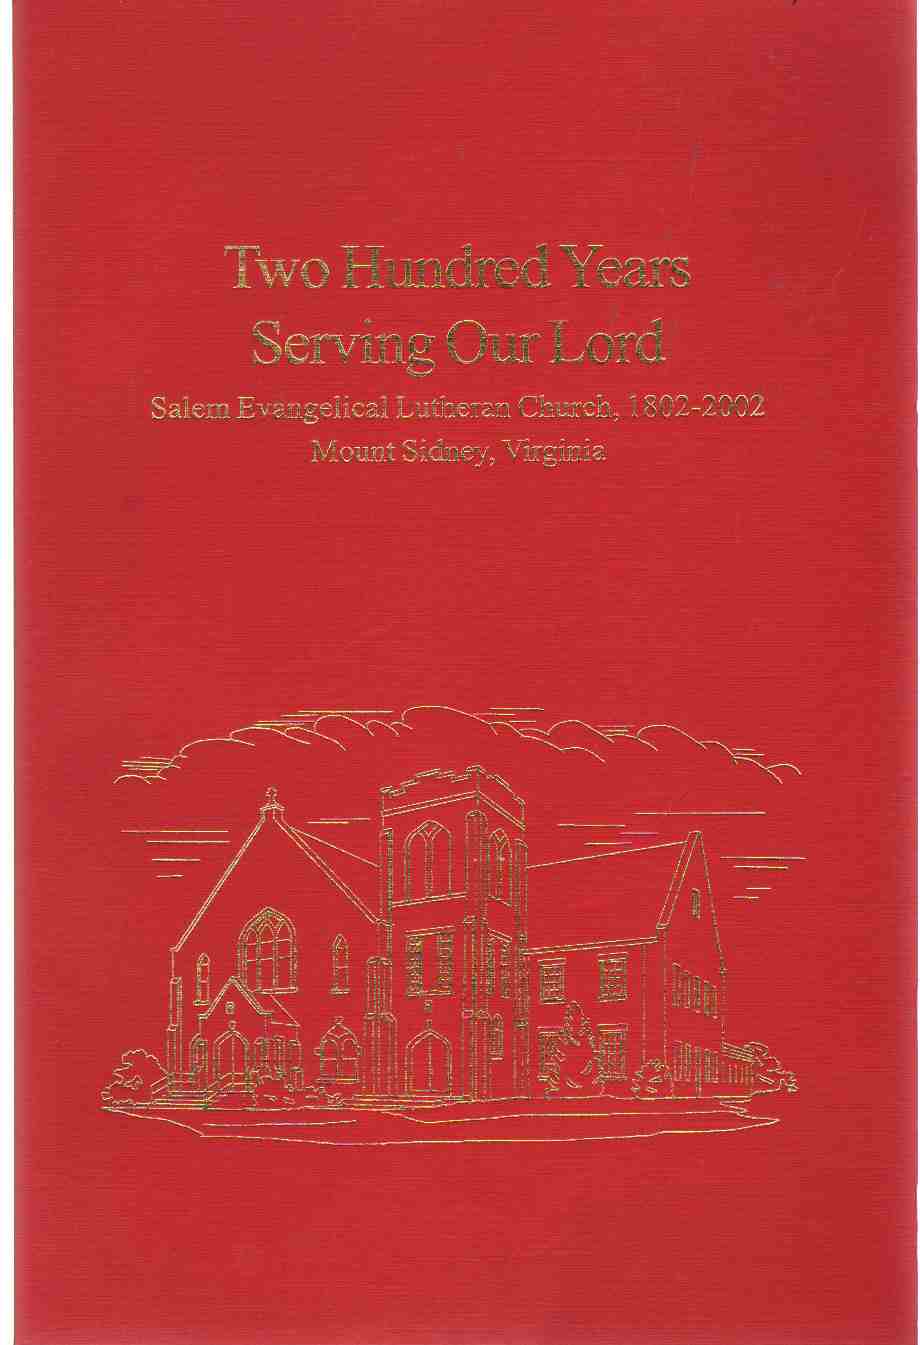 Image for TWO HUNDRED YEARS SERVING OUR LORD Salem Evangelical Lutheran Church, 1902-2002, Mount Sidney, Virginia